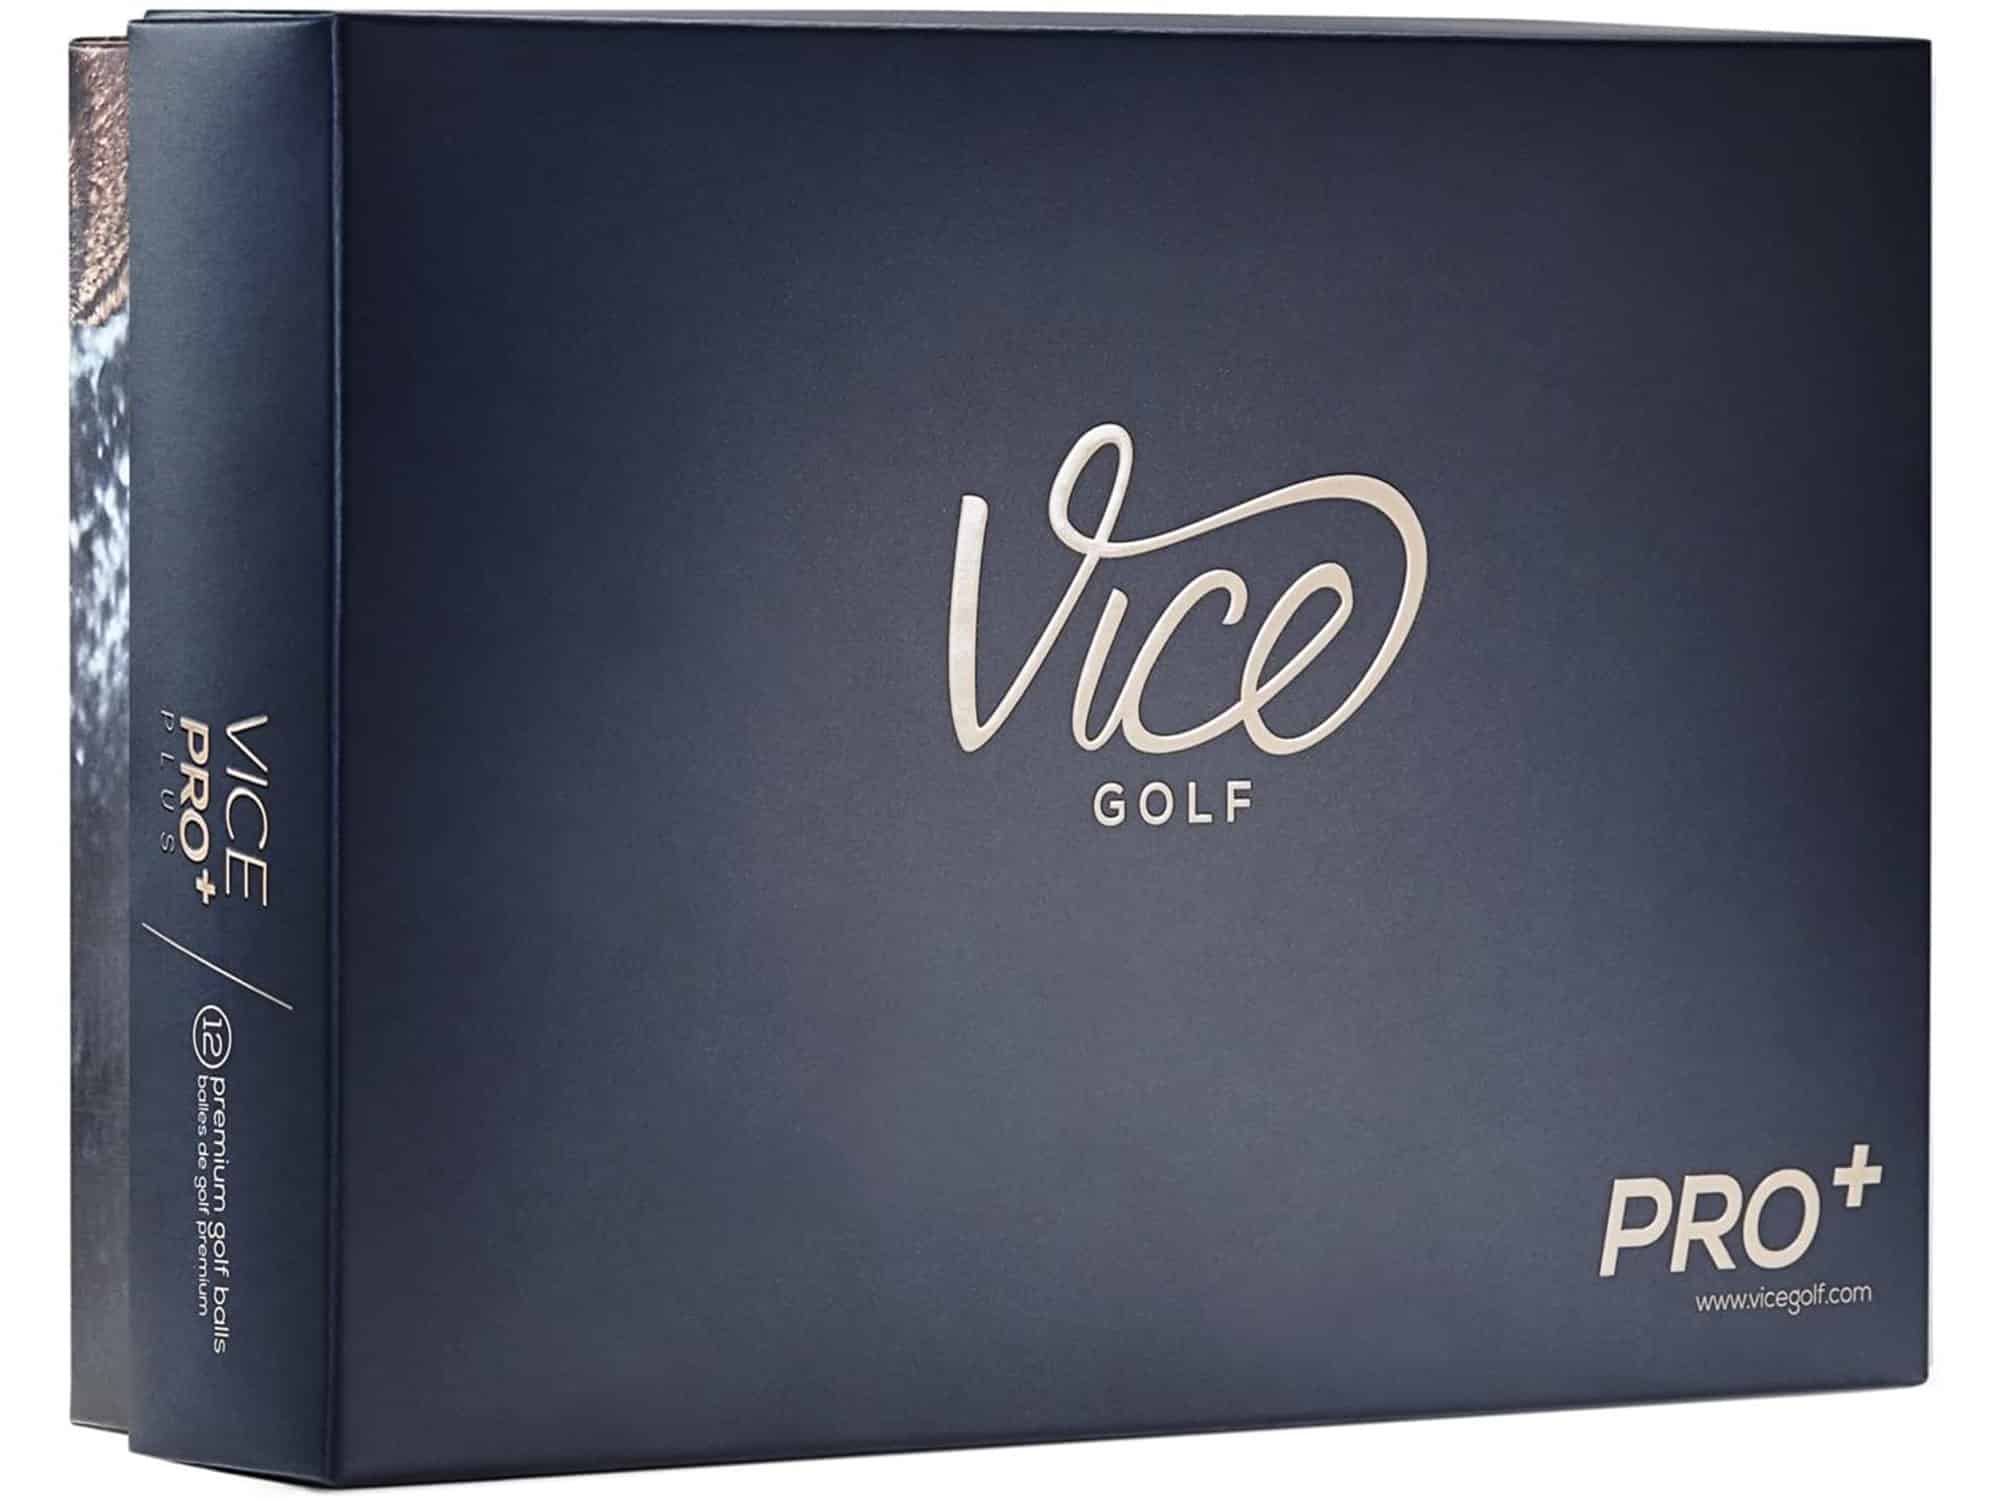 Vice Pro Plus Golf Balls (Package May Vary)